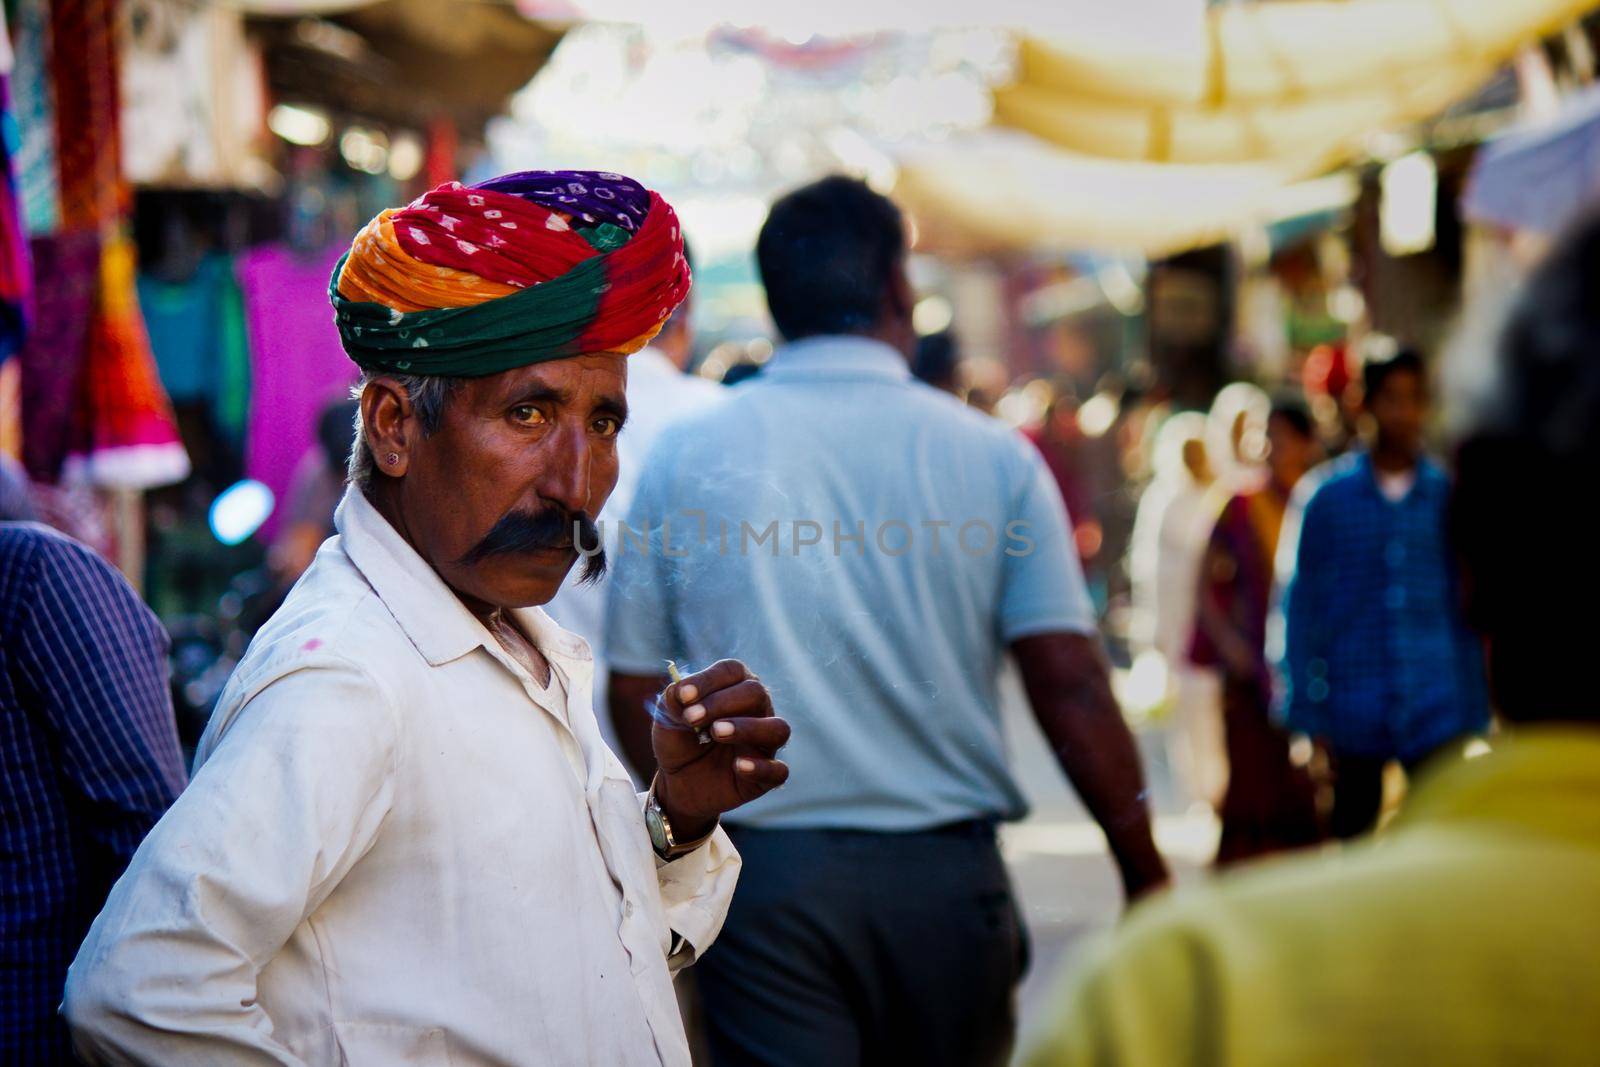 Pushkar, India - NOVEMBER 10, 2016: An old Rajasthani man in traditional ethnic wear such as colorful turban and typical white shirt smoking cigarette or mini-cigar filled with tobacco